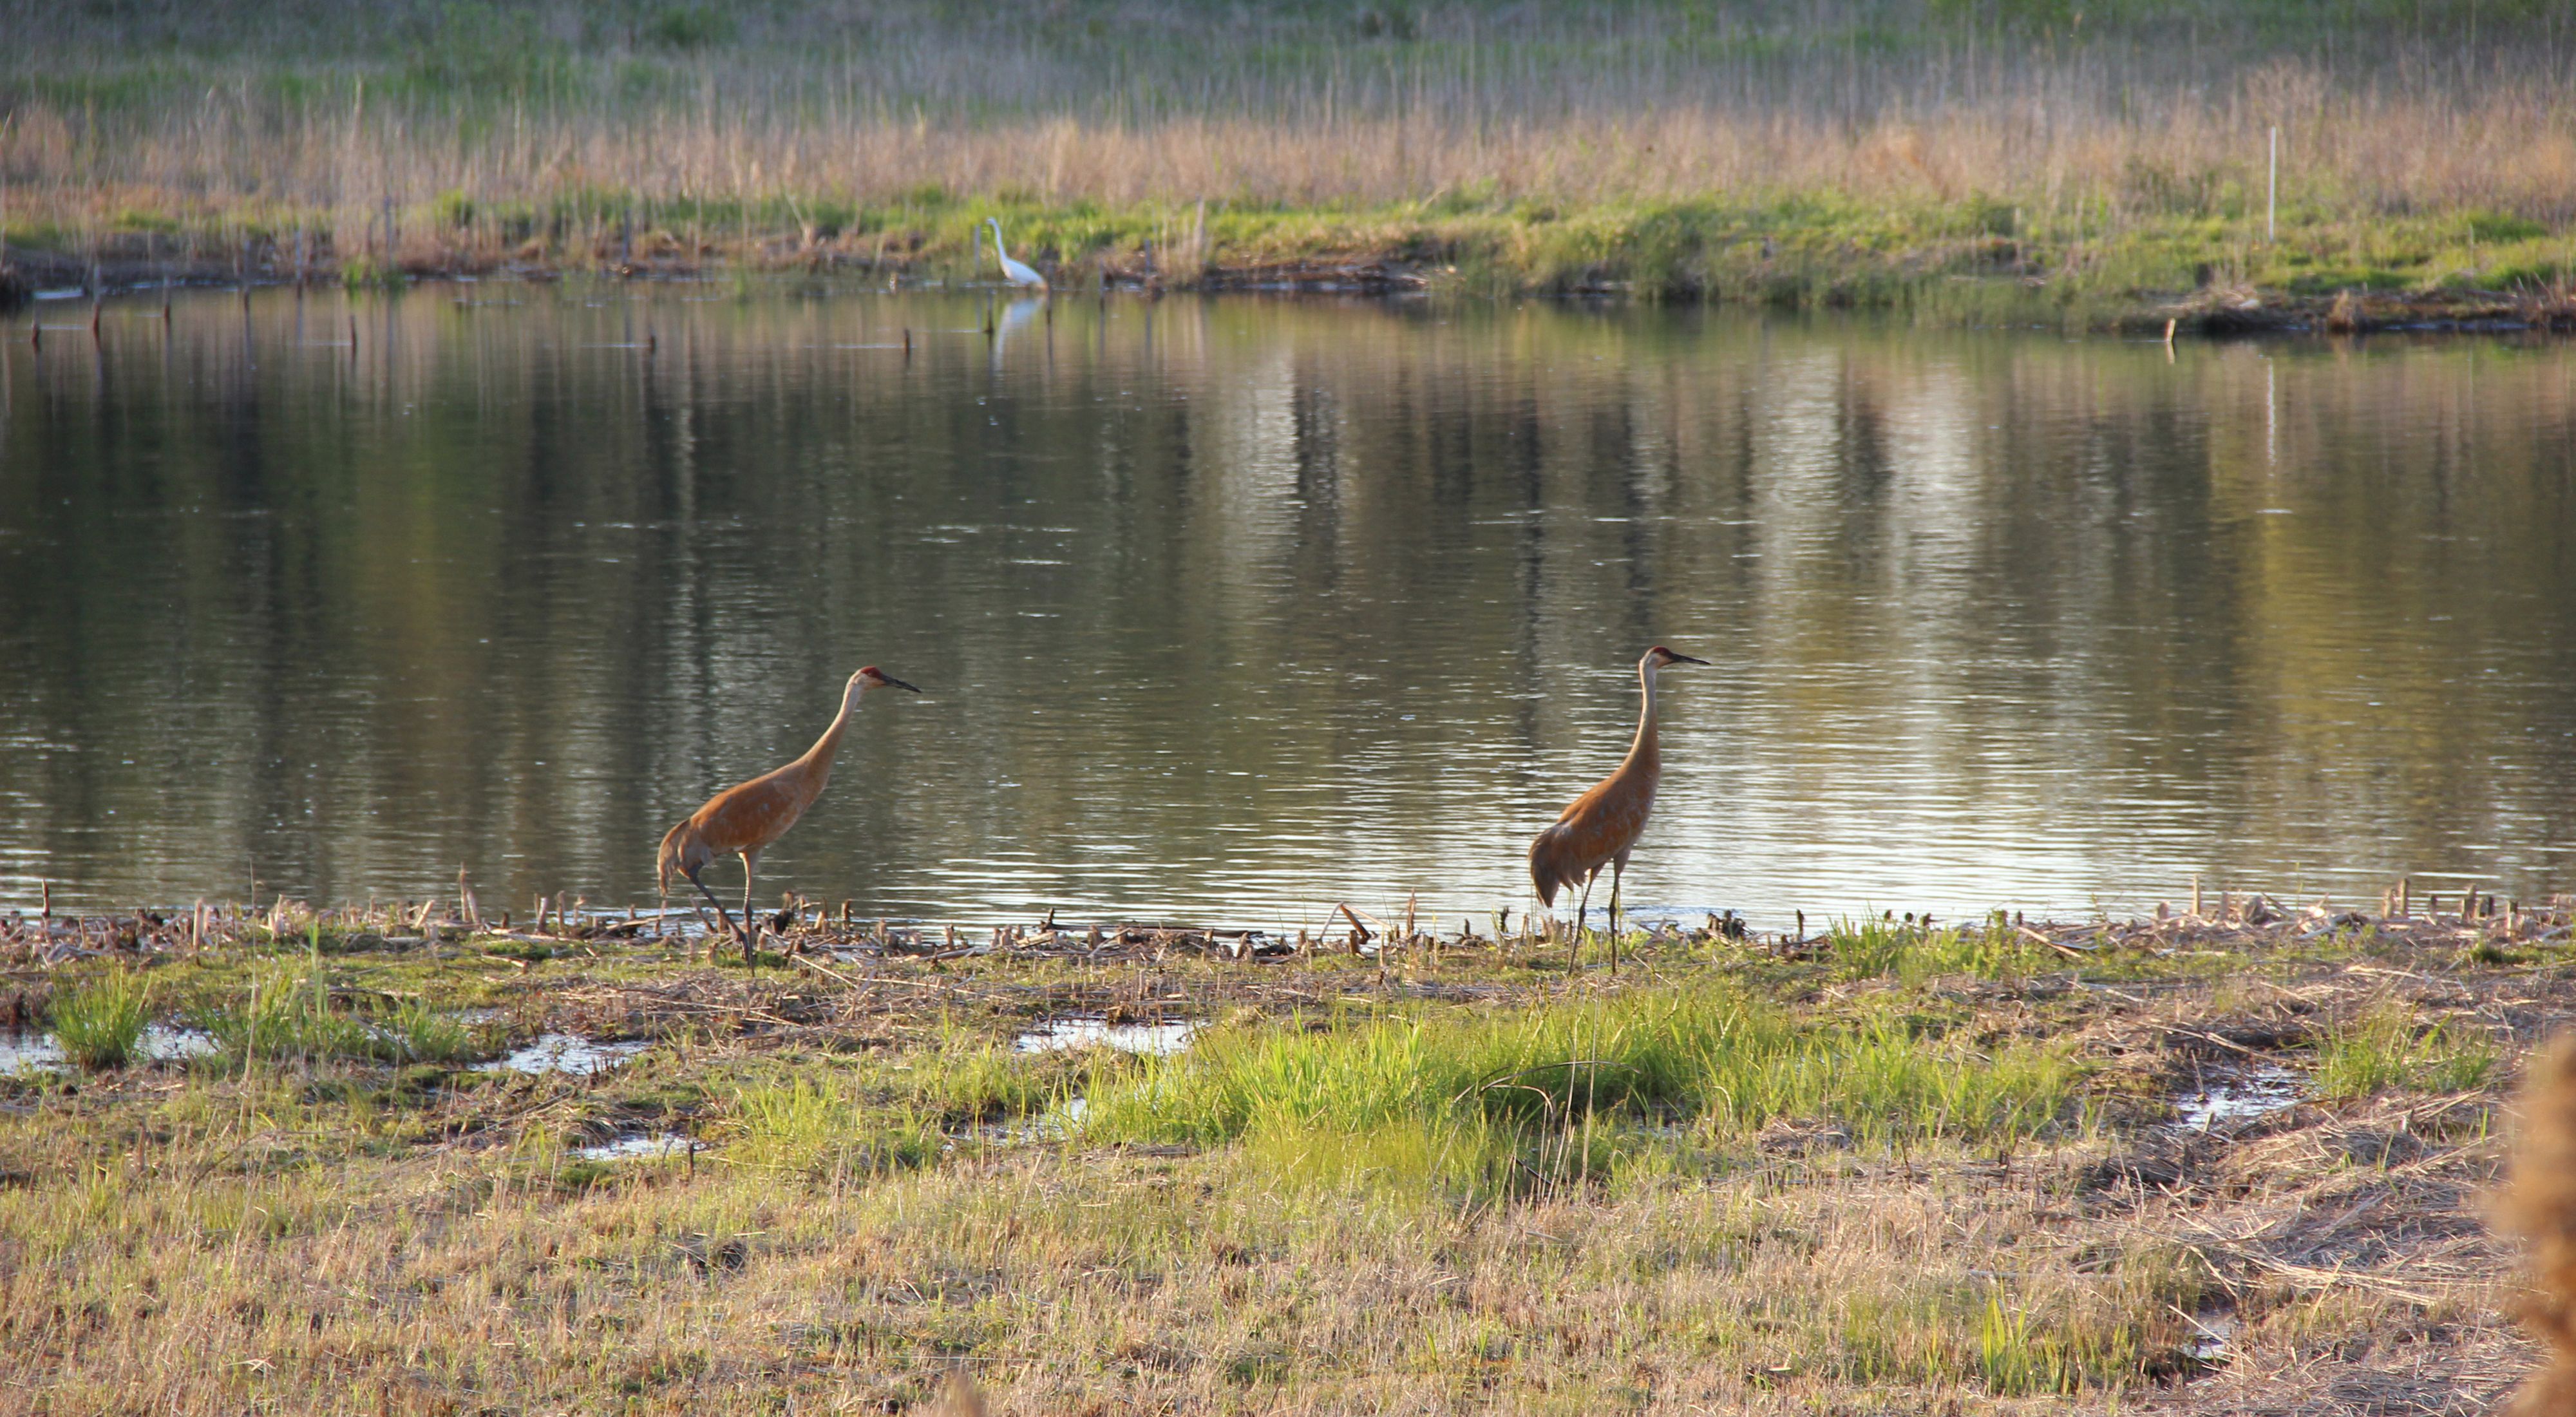 Tall wading birds along the banks of a river with low vegetation.